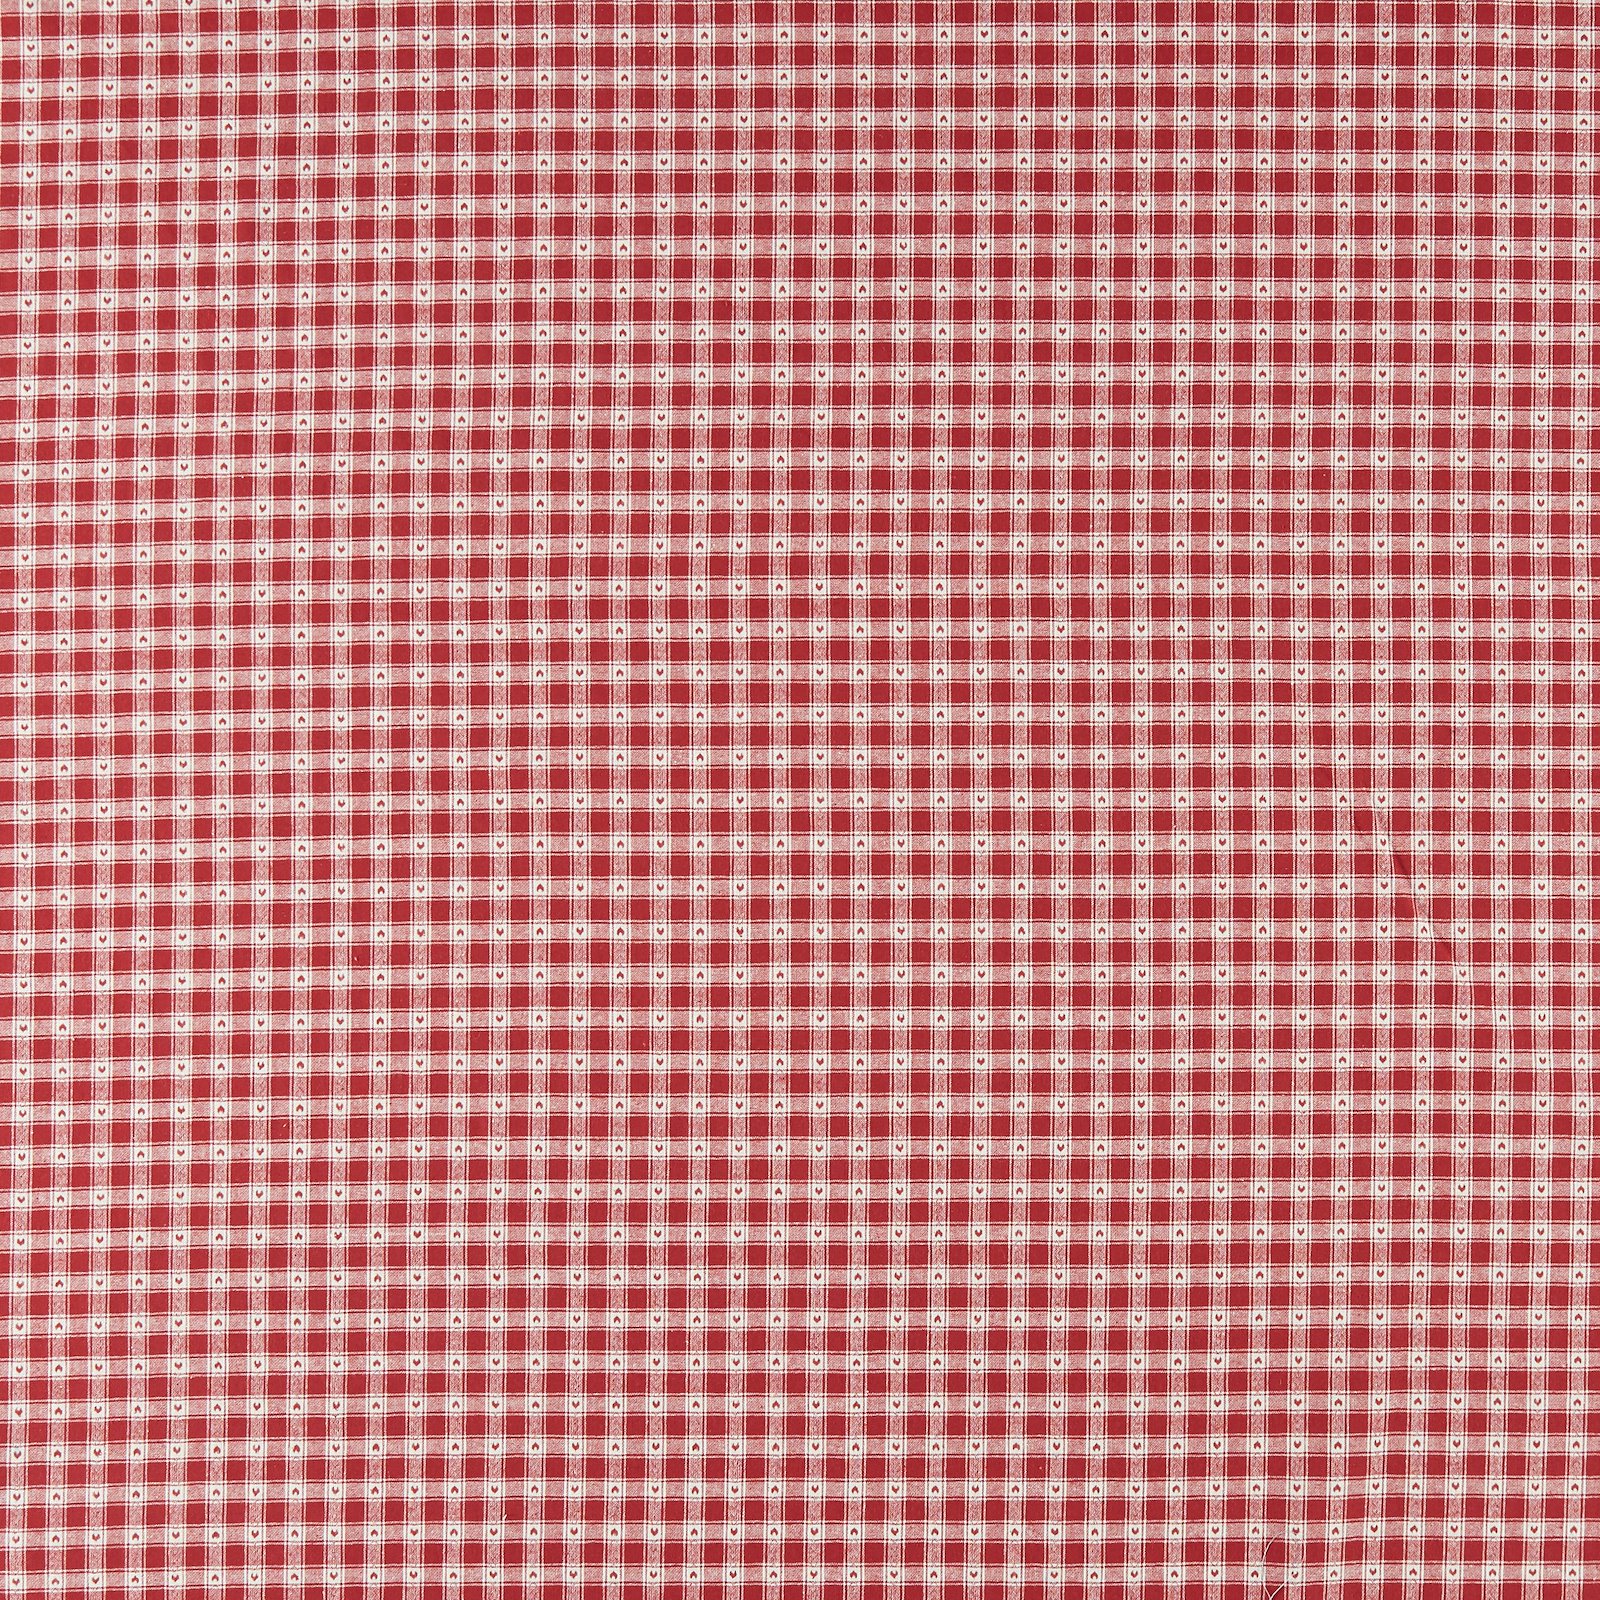 Woven cotton red/white YD check w hearts 816311_pack_sp